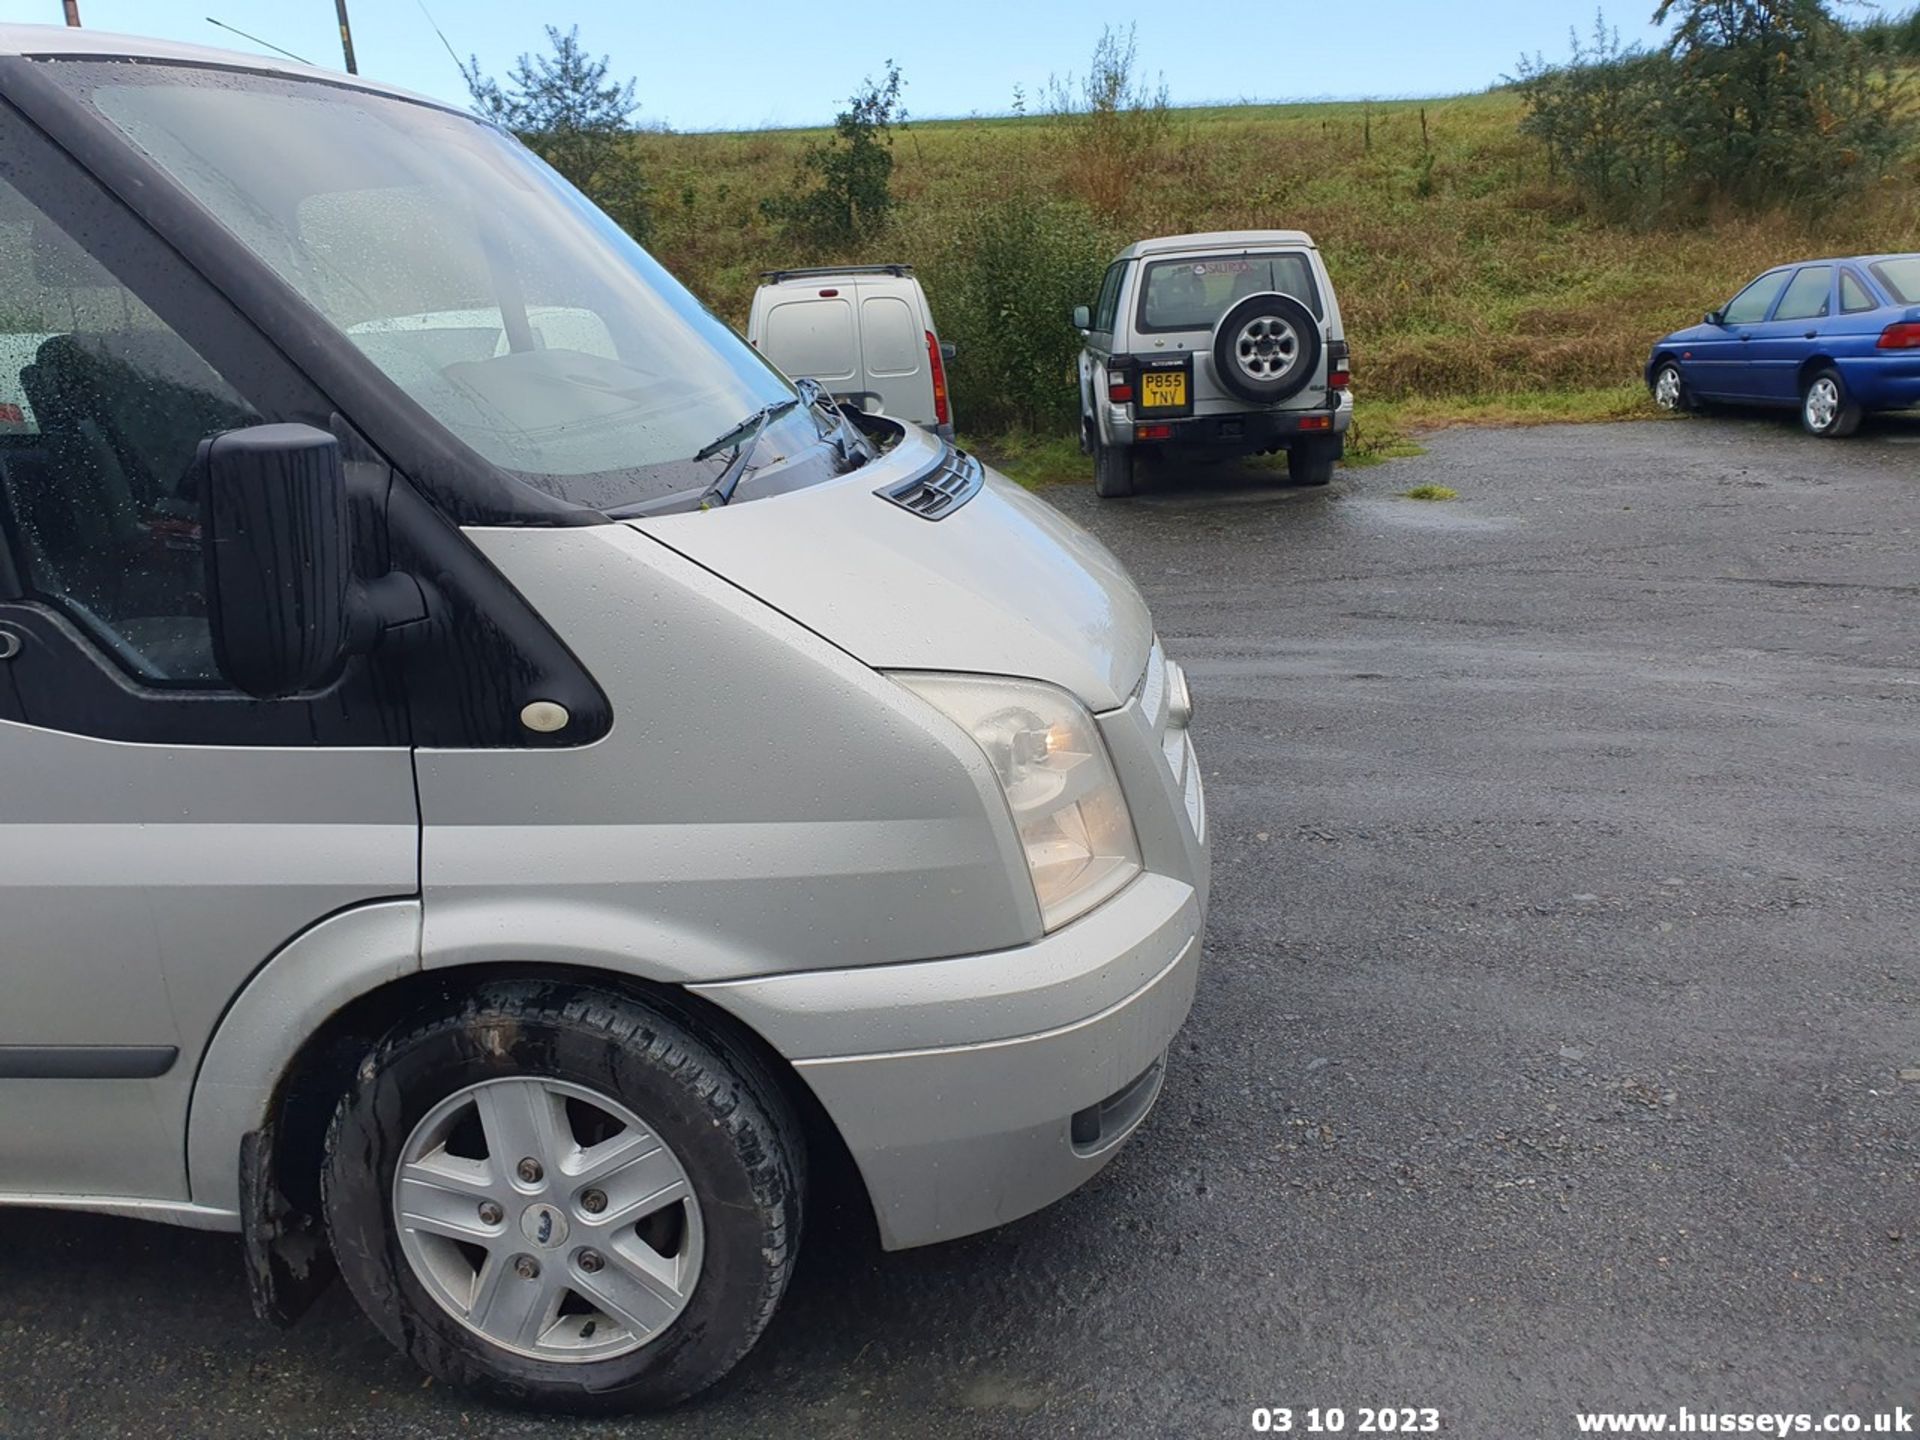 13/62 FORD TRANSIT 125 T280 FWD - 2198cc 5dr MPV (Silver, 146k) - Image 25 of 65